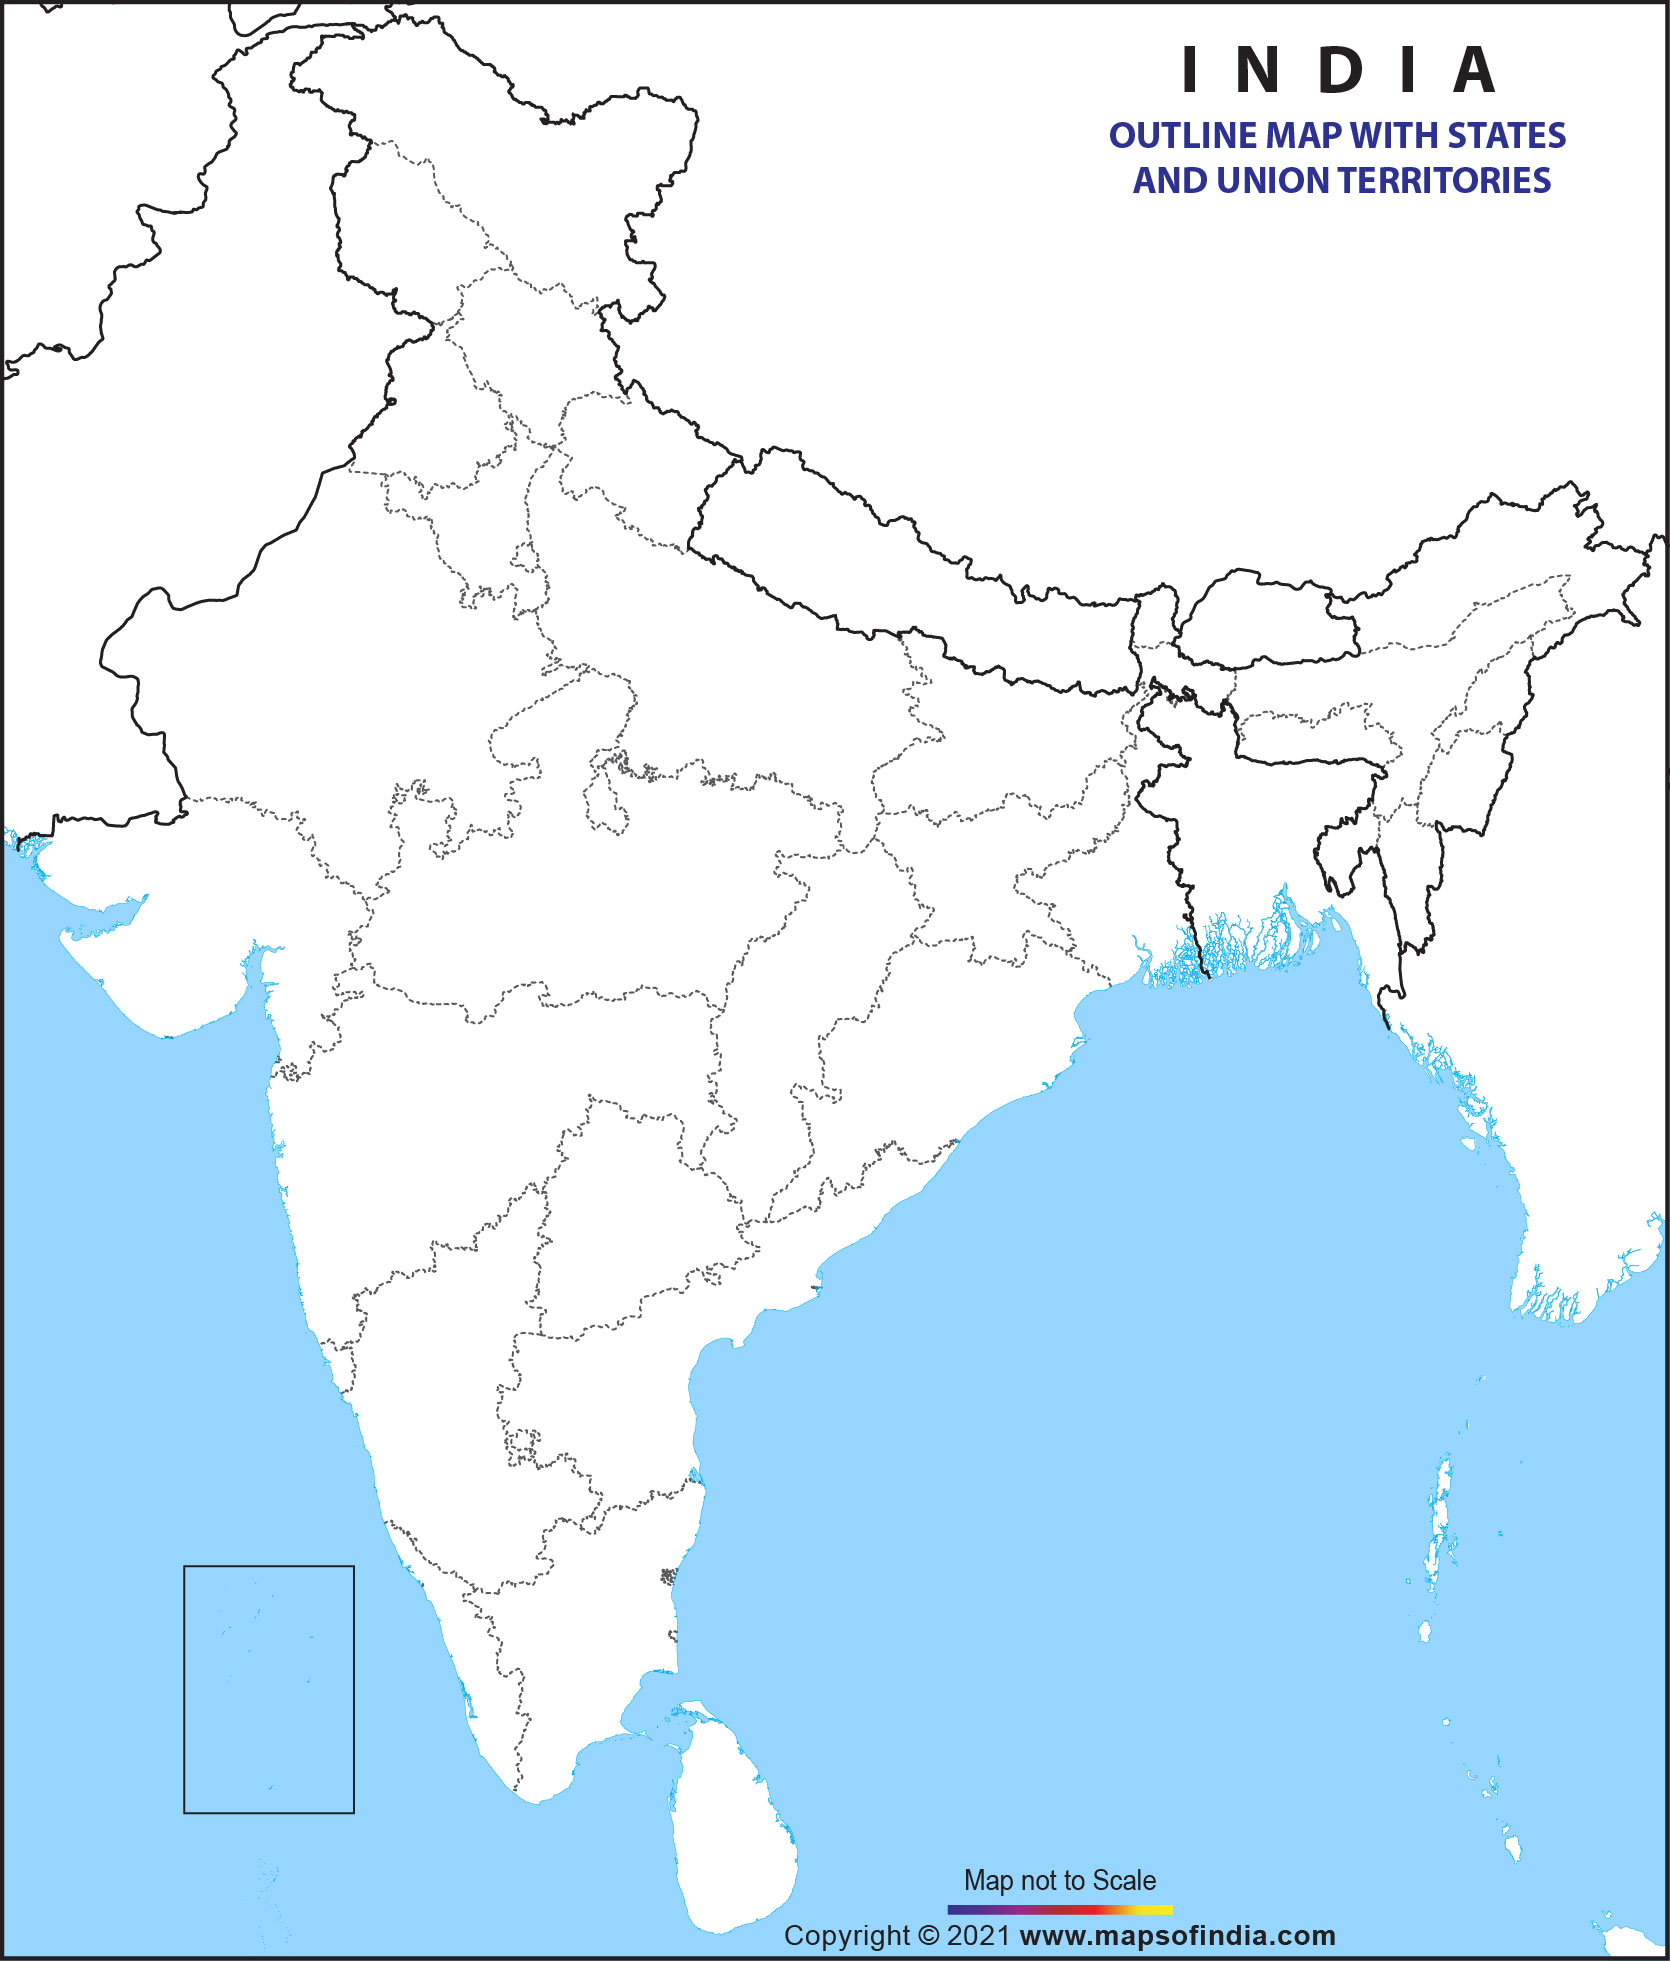 Outline Map of India Enlarged View